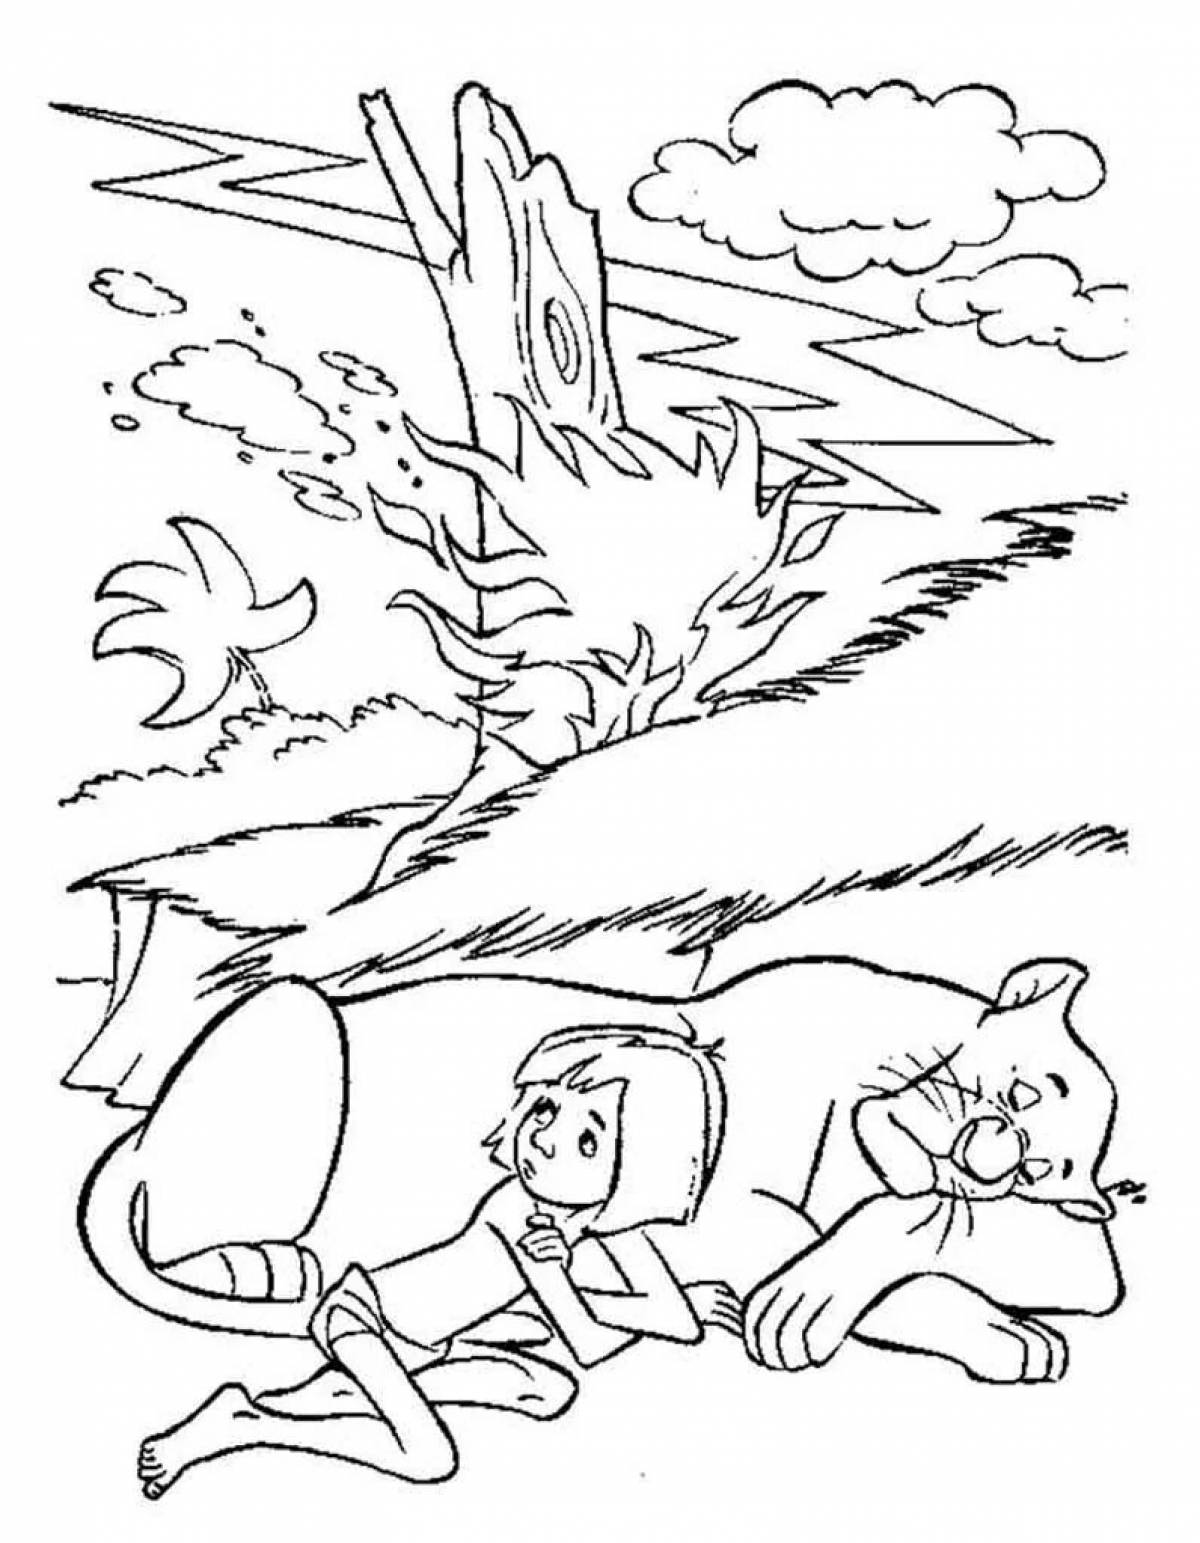 Large forest fire coloring page